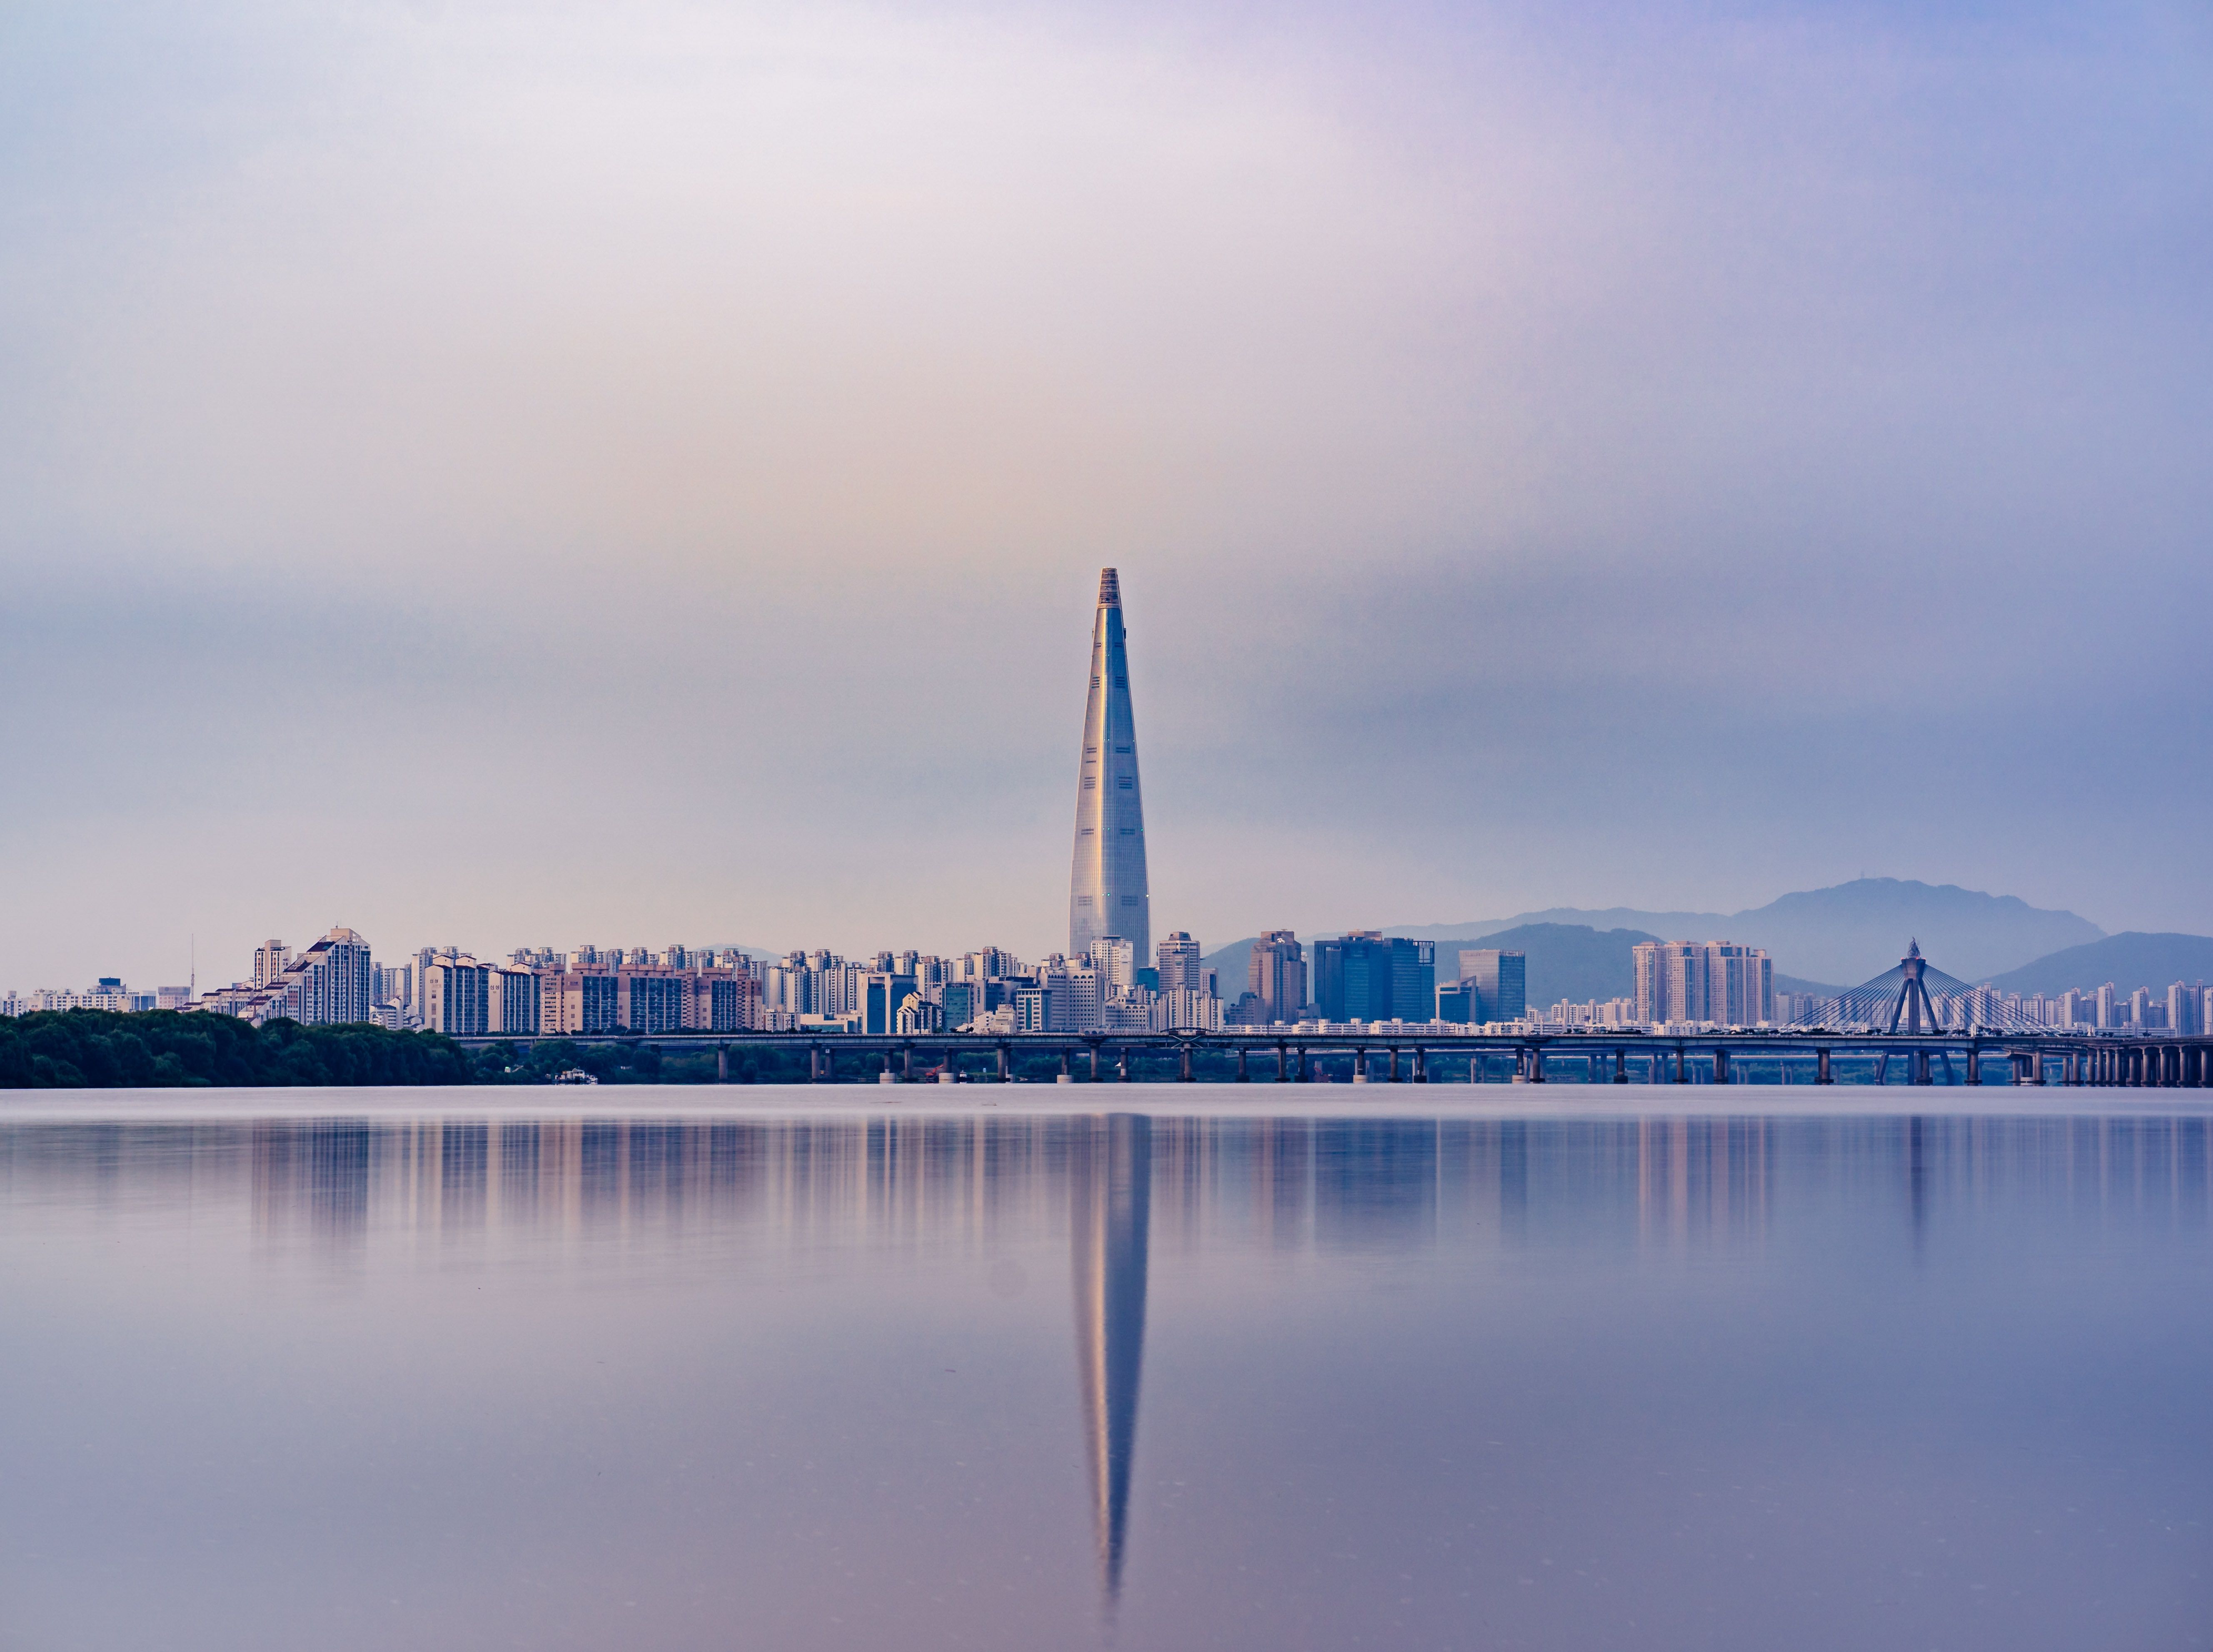 A city skyline with a tall building in the middle and a body of water in the foreground. - Seoul